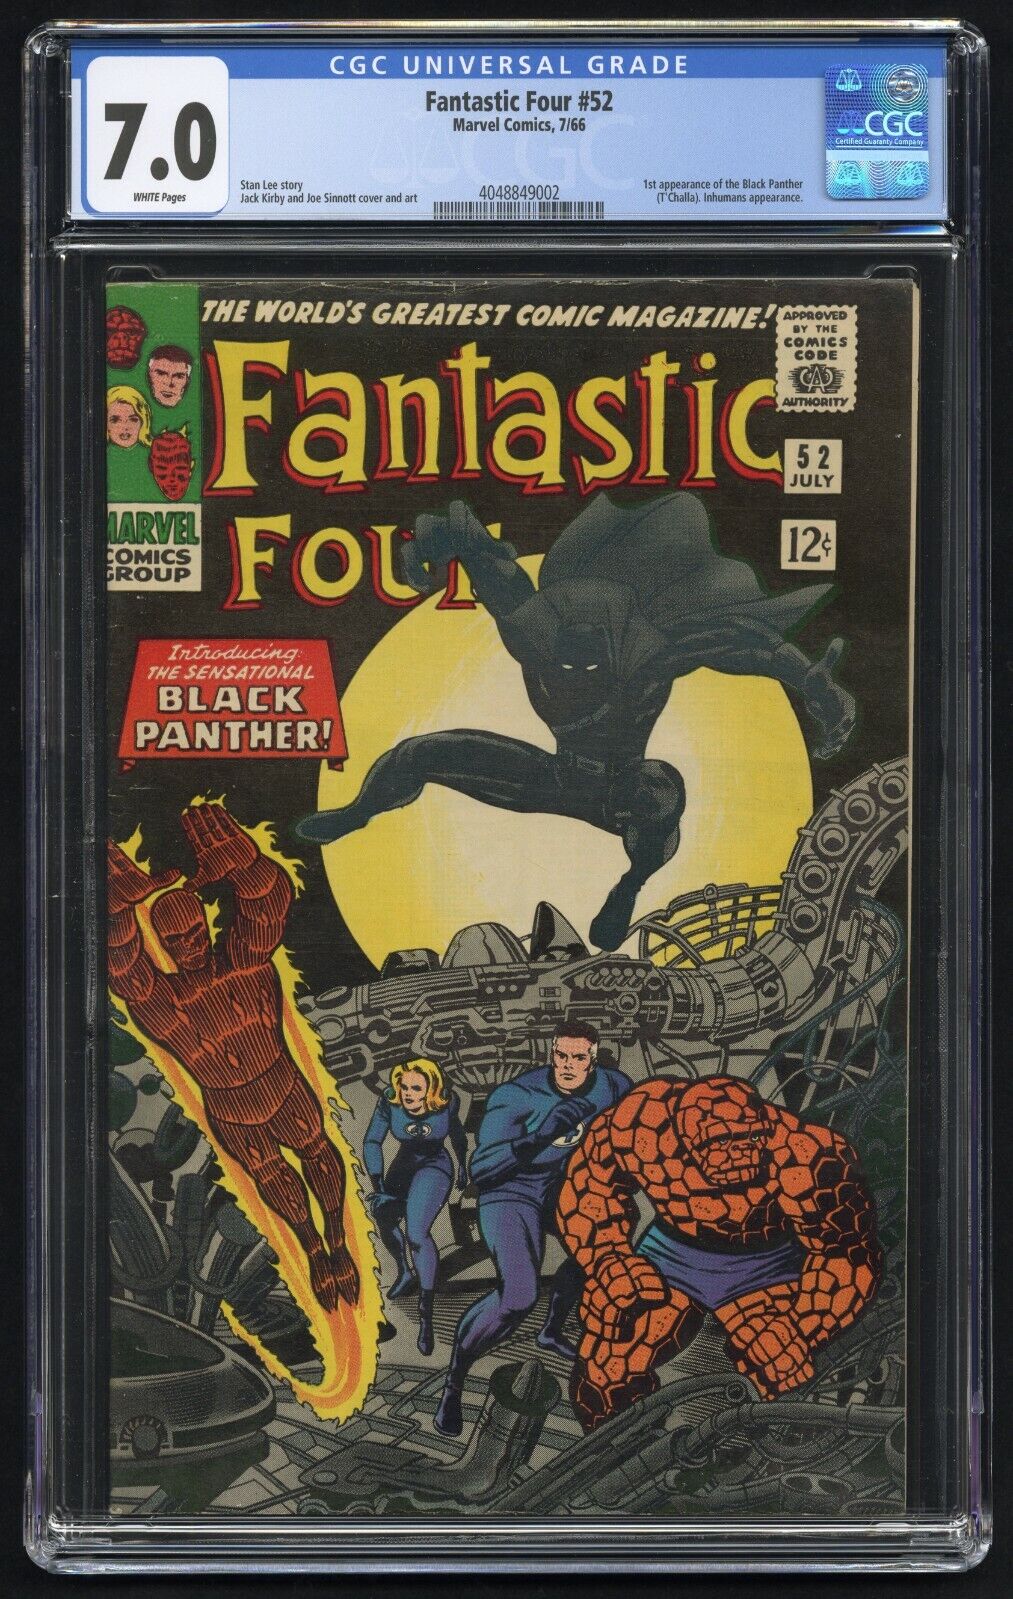 Fantastic Four 52 CGC 70 White Pages Marvel 766 1st app Black Panther